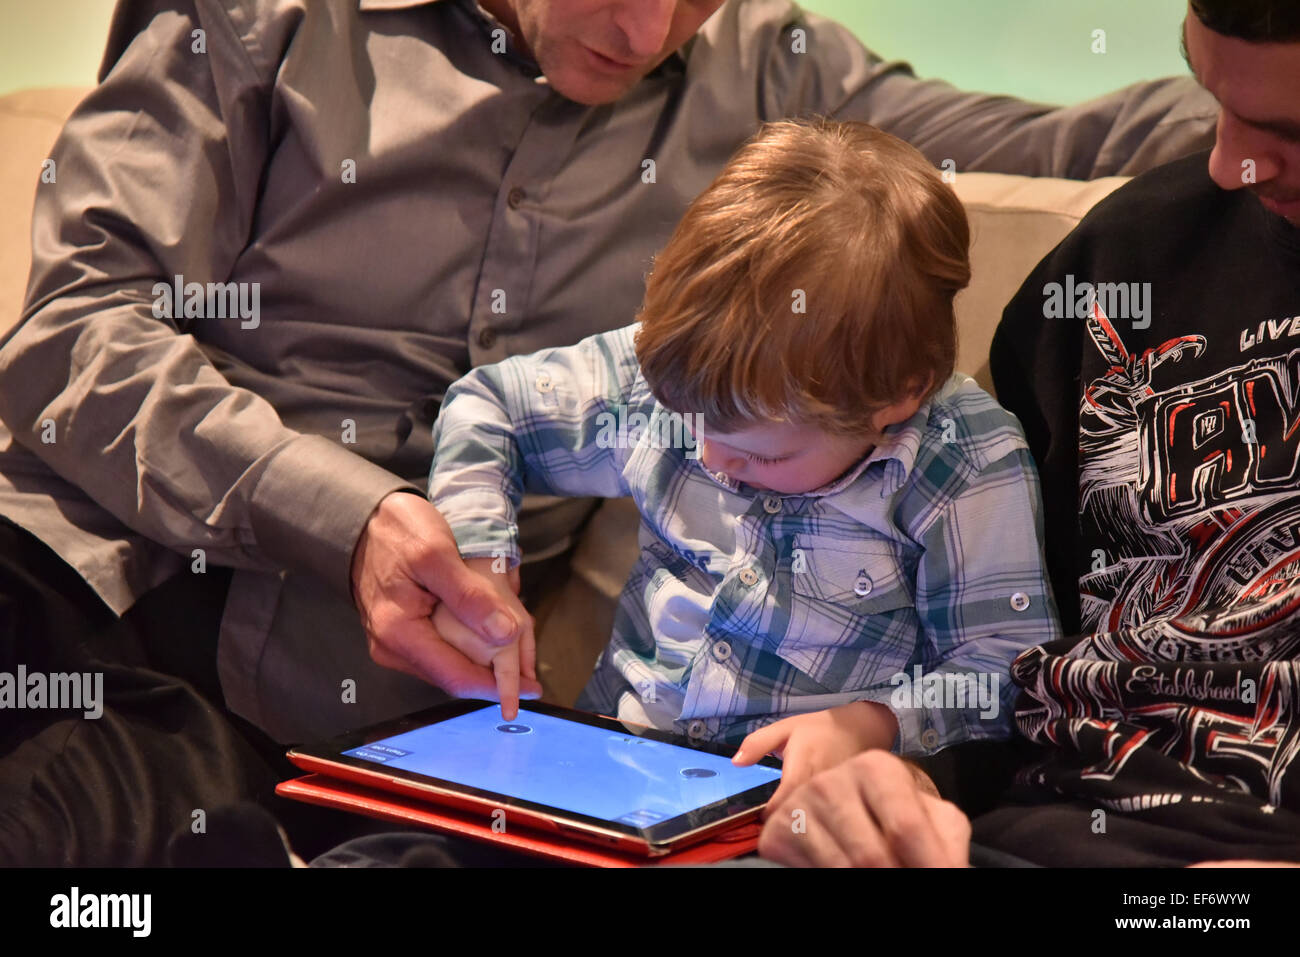 A young boy (2 1/2 yrs) playing on an iPad sat between two adults who are helping him play Stock Photo